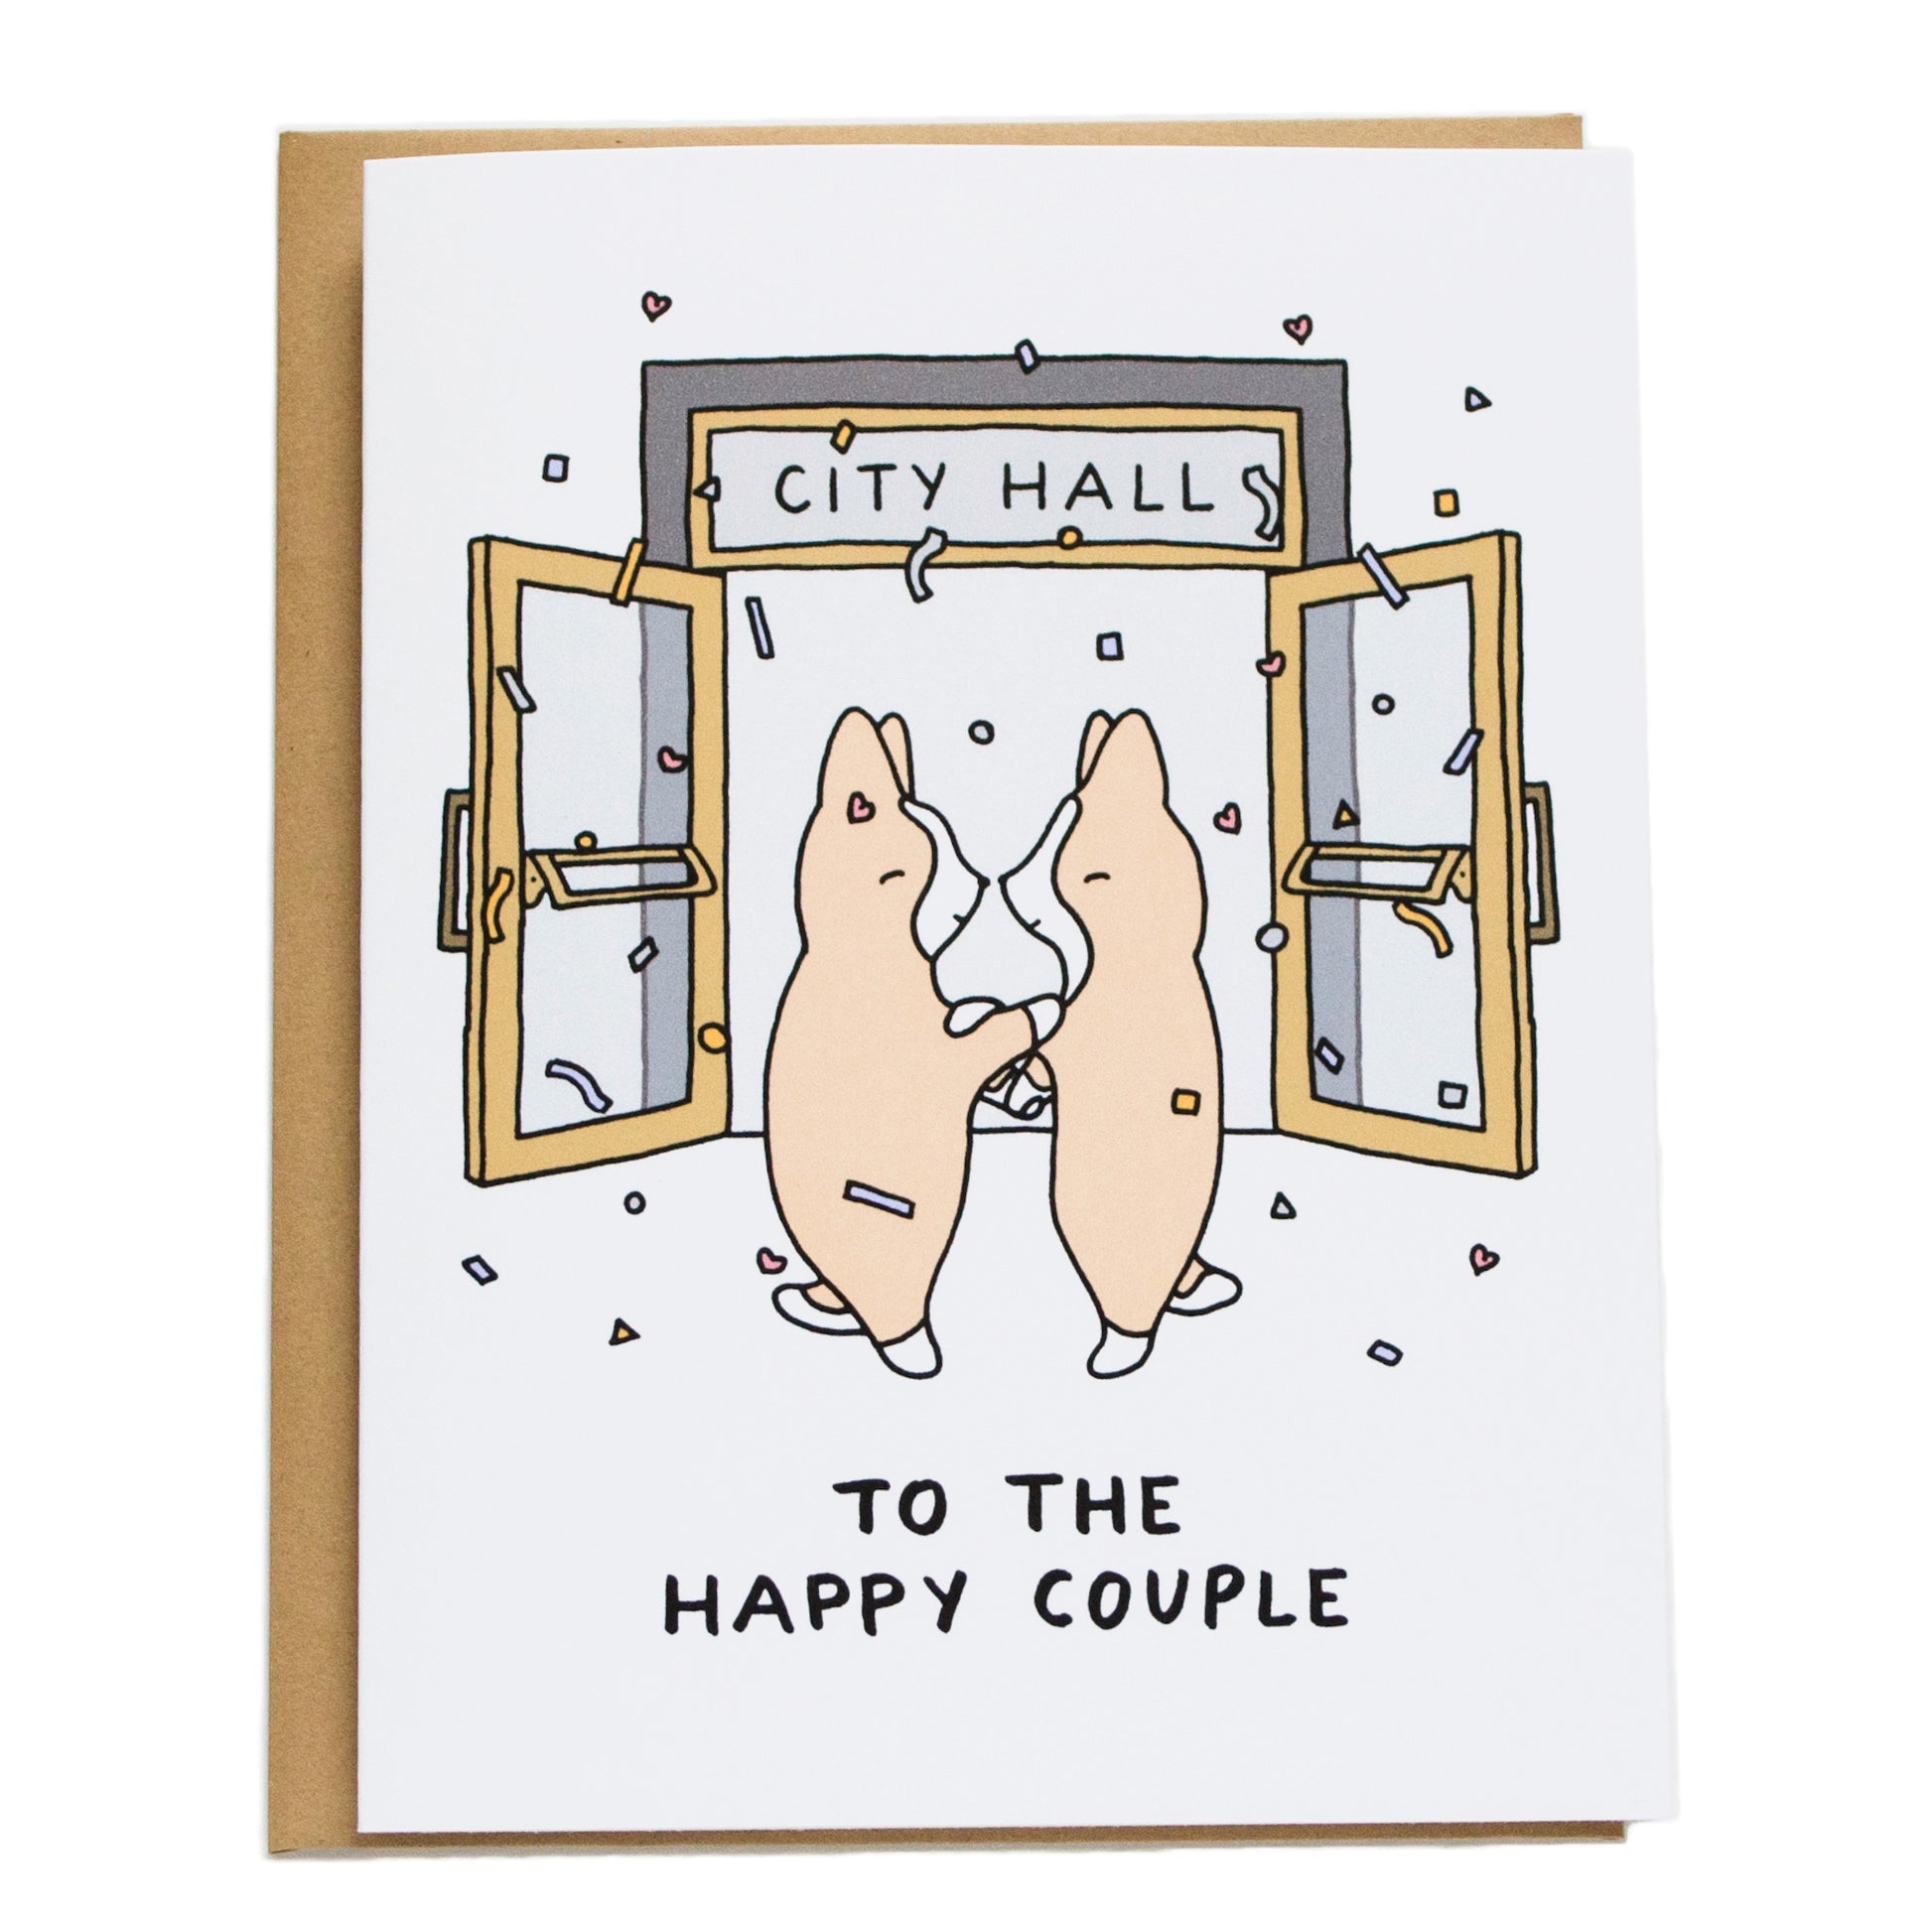 two corgis each with a foot kicked up in front of city hall doors and confetti in the air and card reads To the happy couple